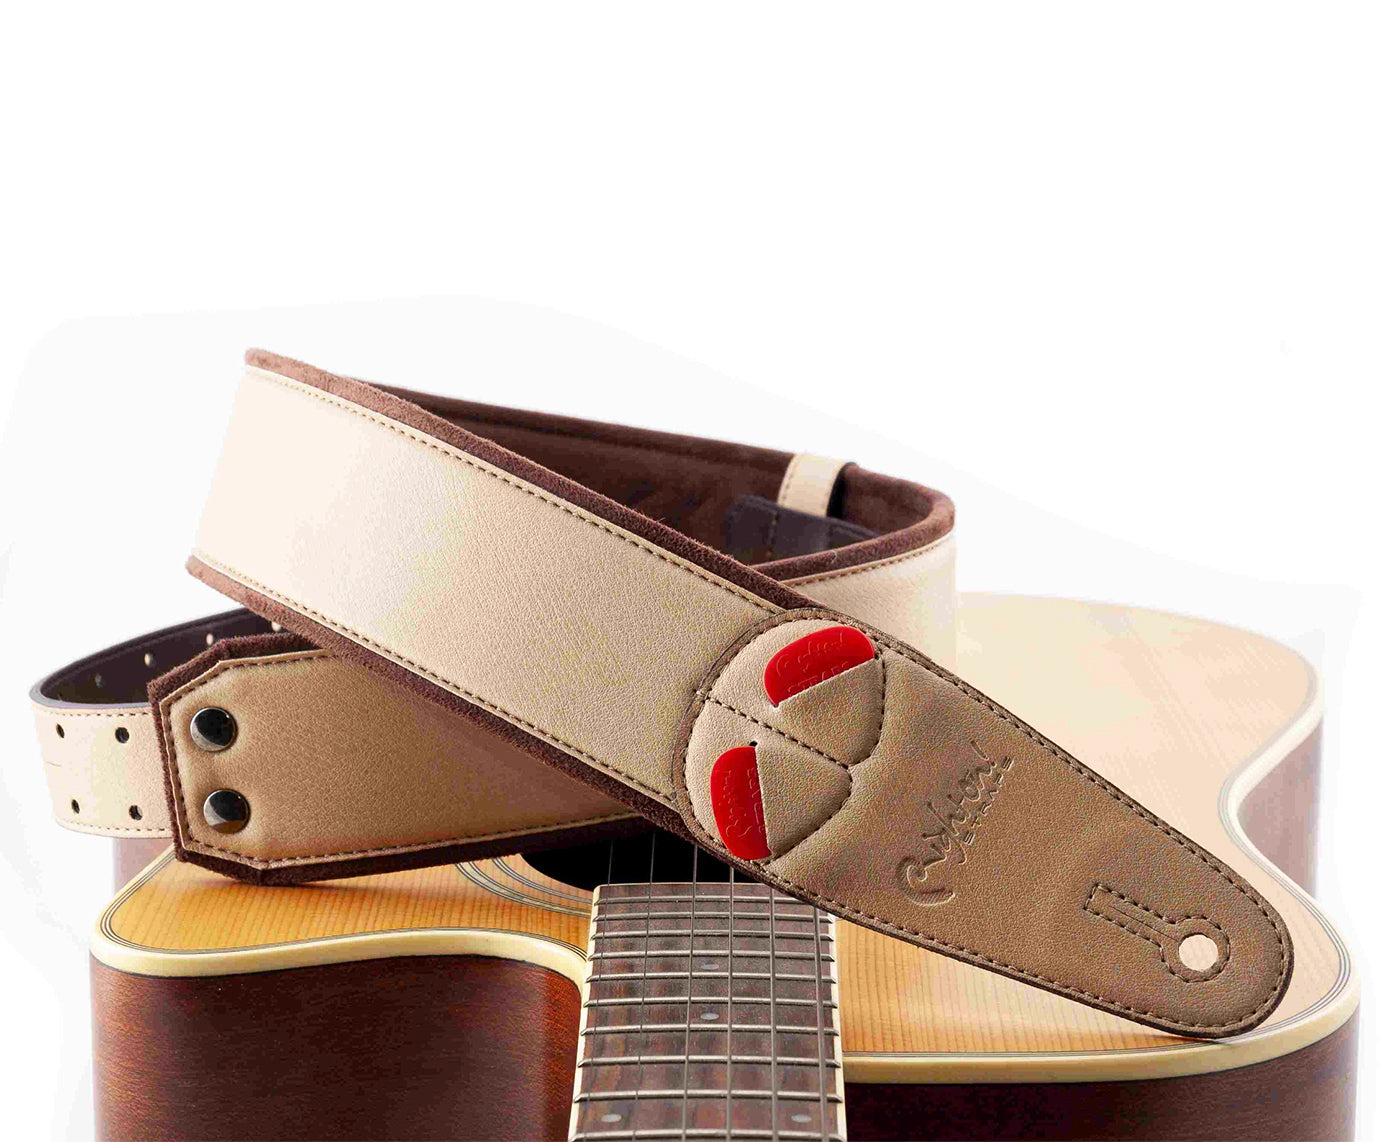 RightOn Guitar straps and straps for bass